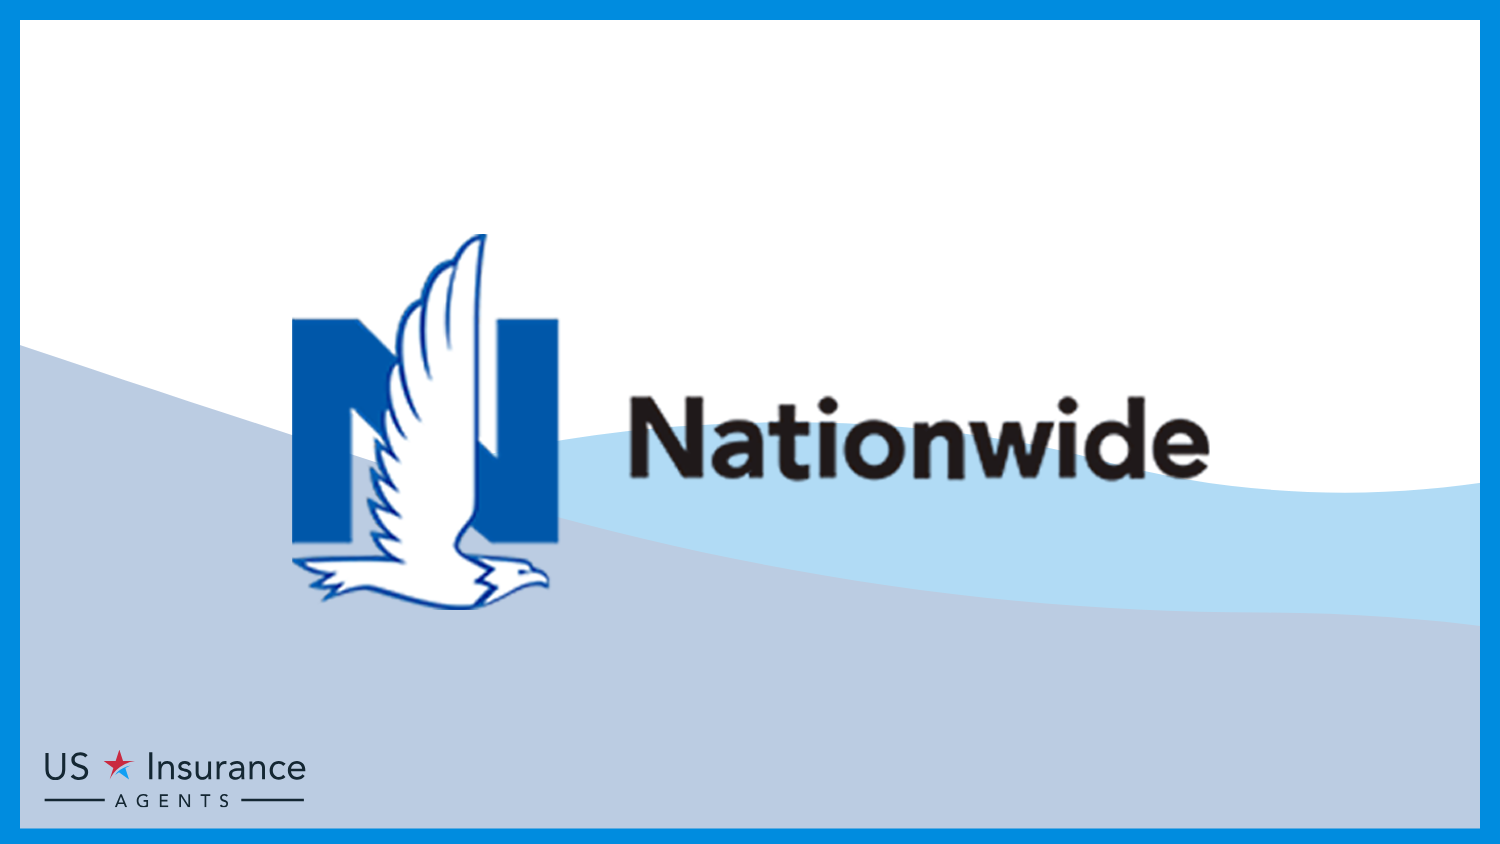 Nationwide: Best Business Insurance for Musical Instrument Companies